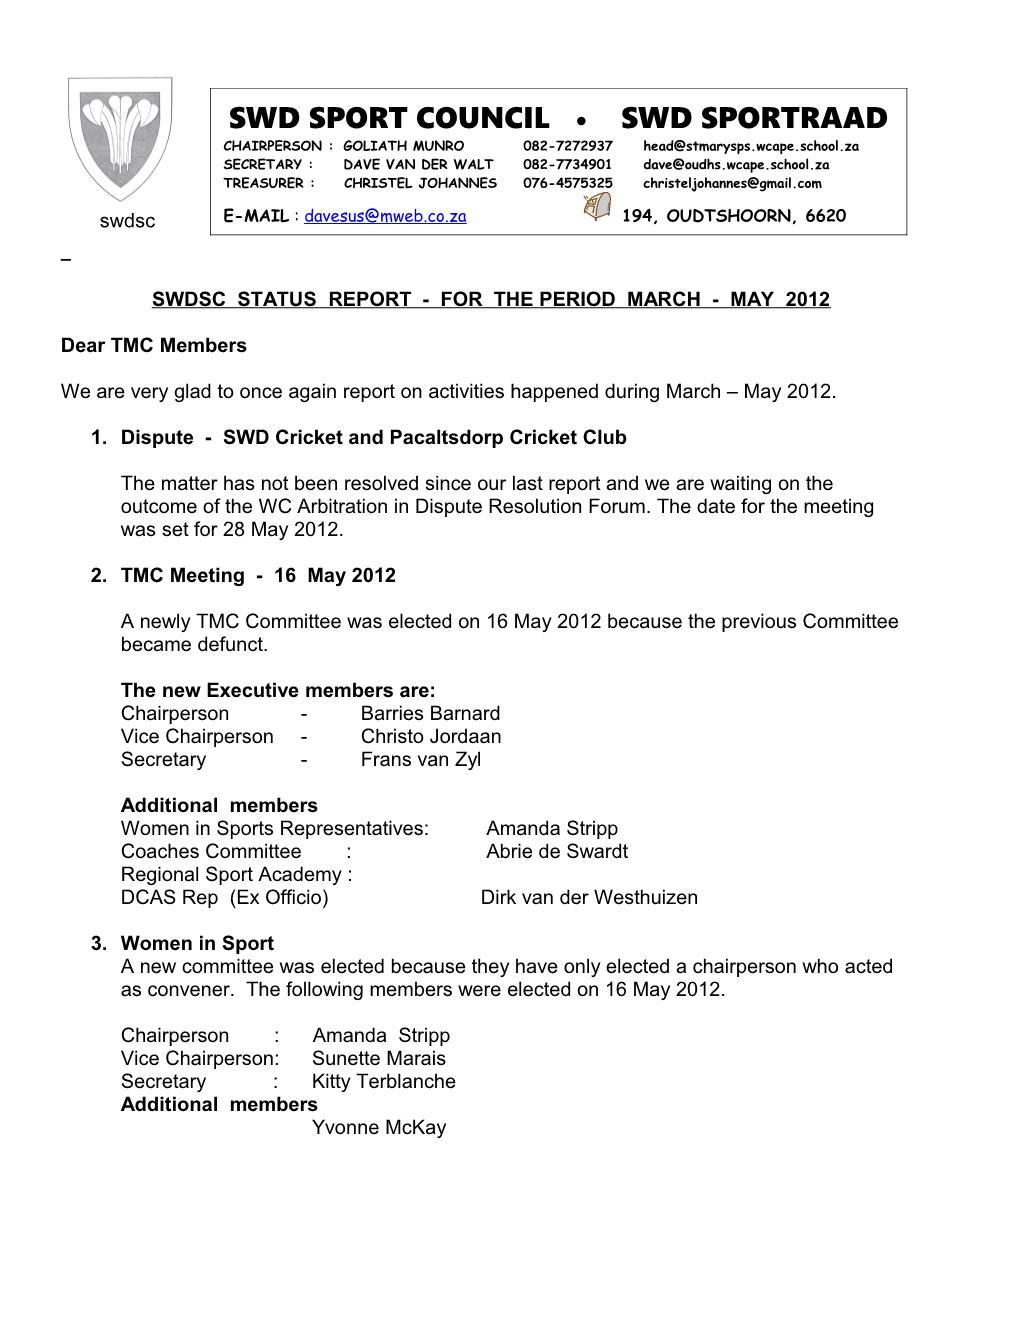 Swdsc Status Report - for the Period March - May 2012